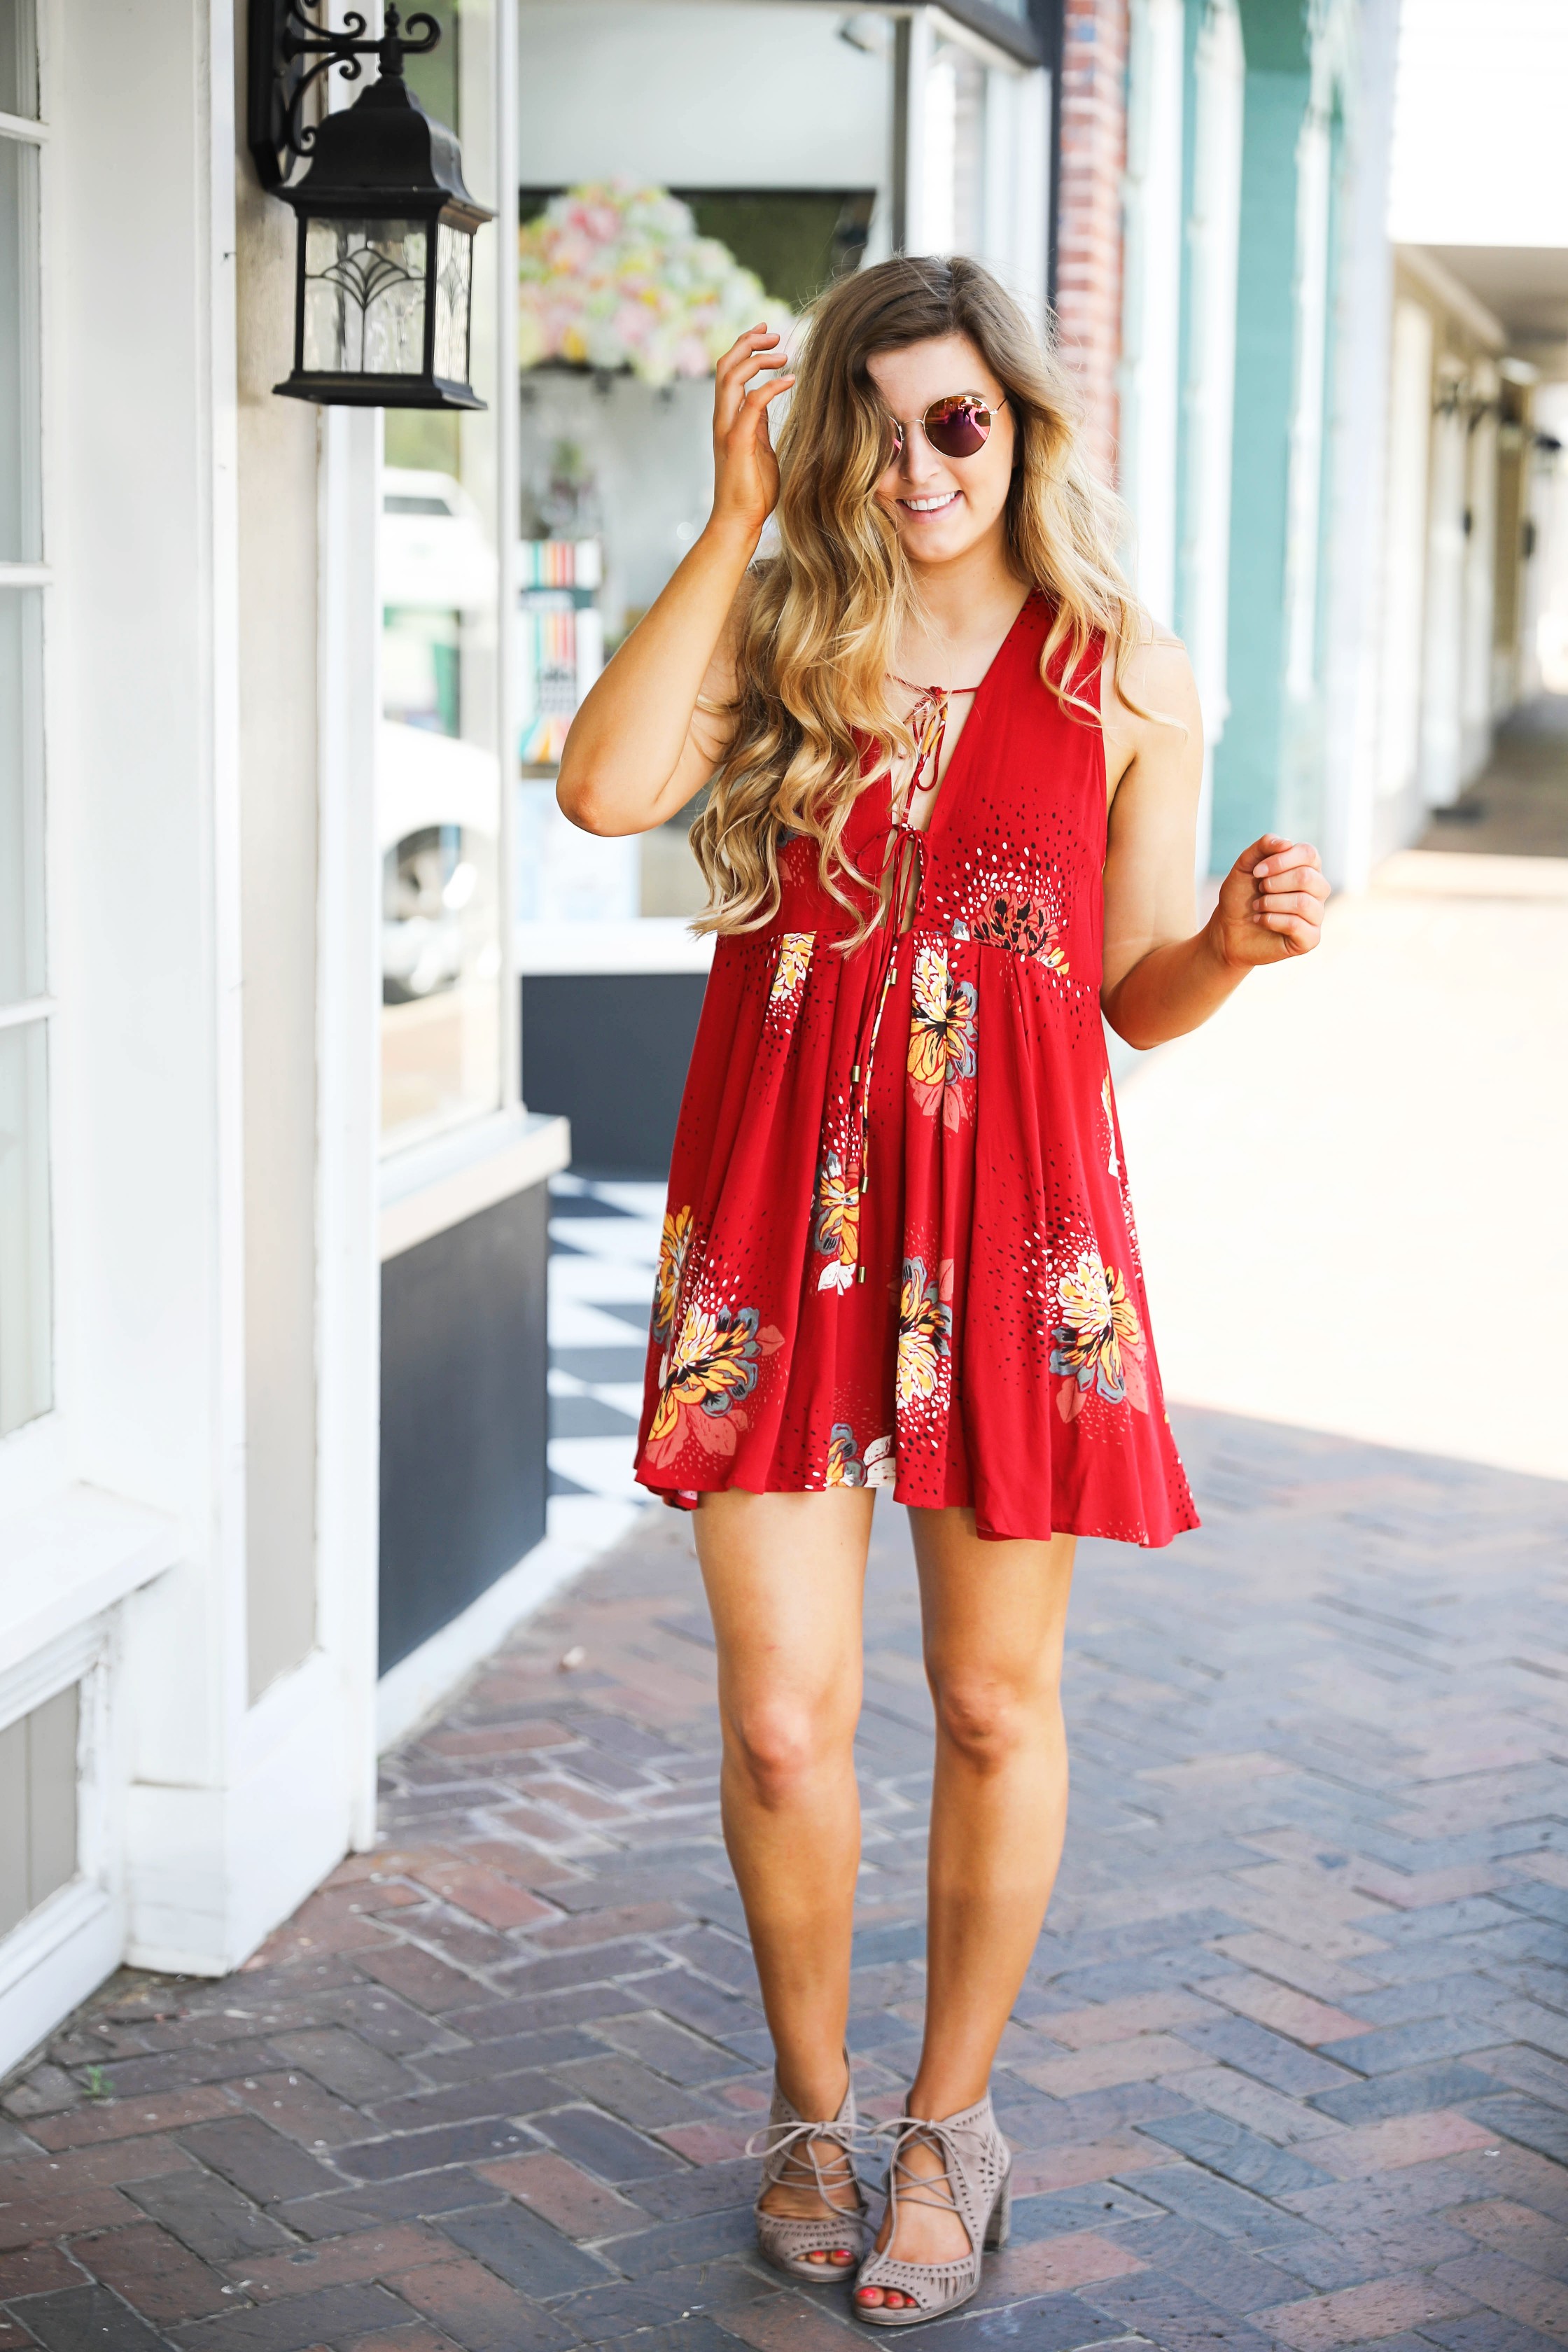 Free People Coachella Inspired Dress with Fun $12 Sunglasses! Cute spring fashion! by Lauren Lindmark on Daily Dose of Charm dailydoseofcharm.com